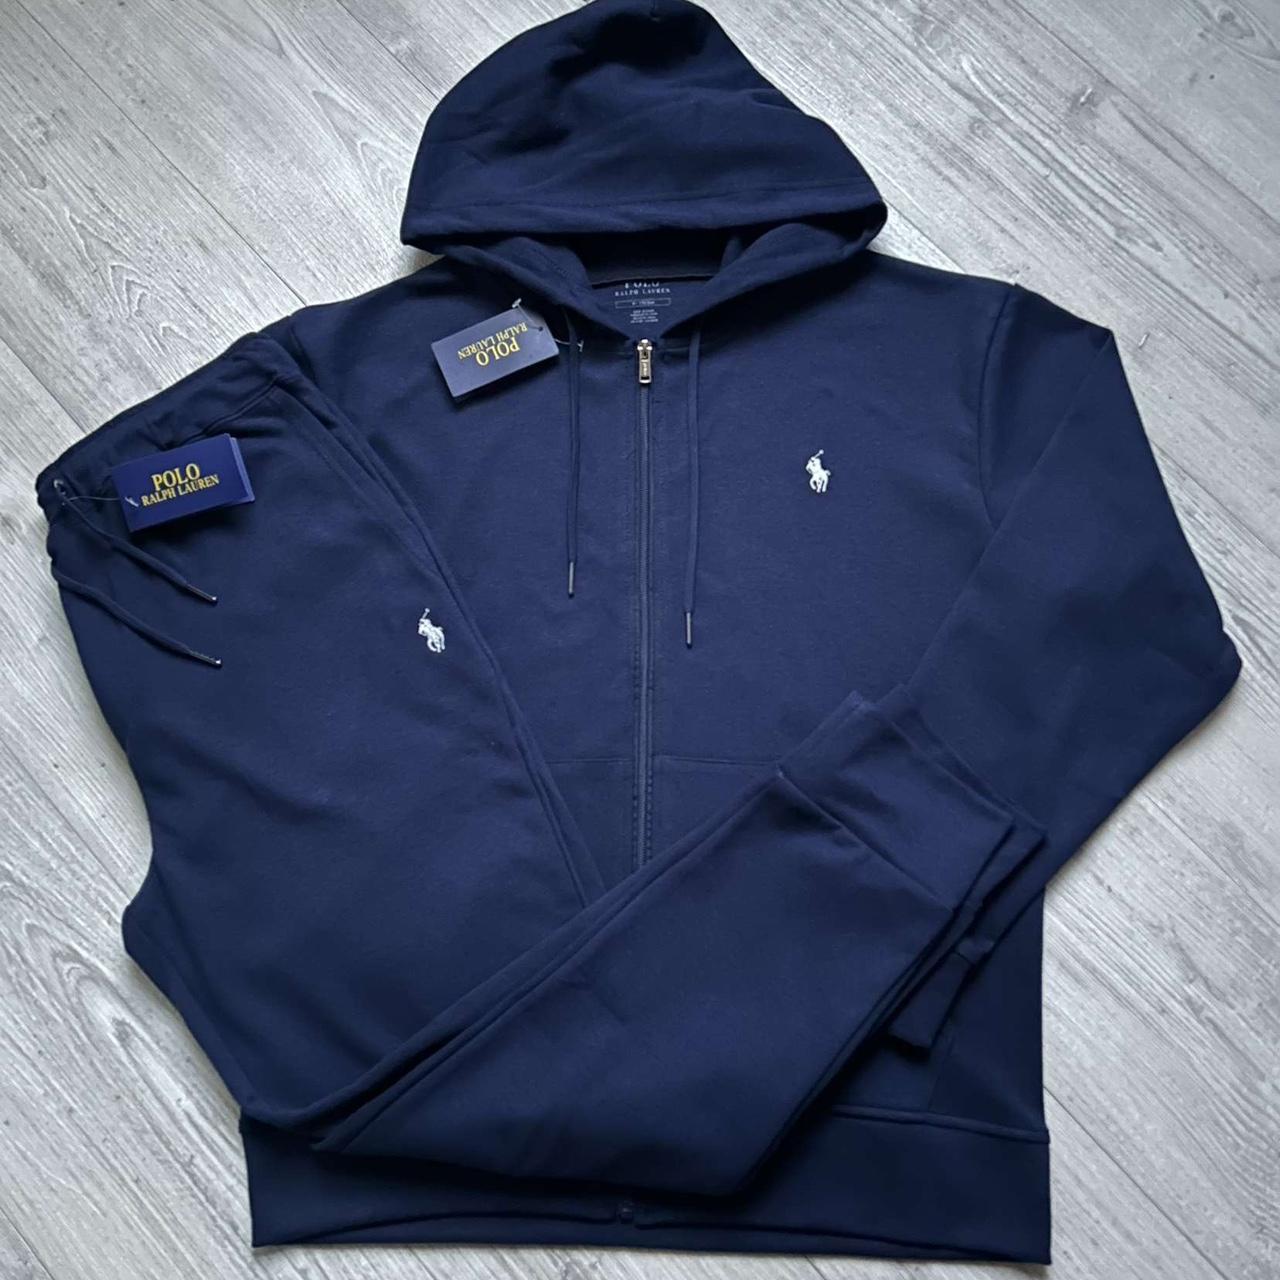 Ralph Lauren polo tracksuit brand new tags included - Depop